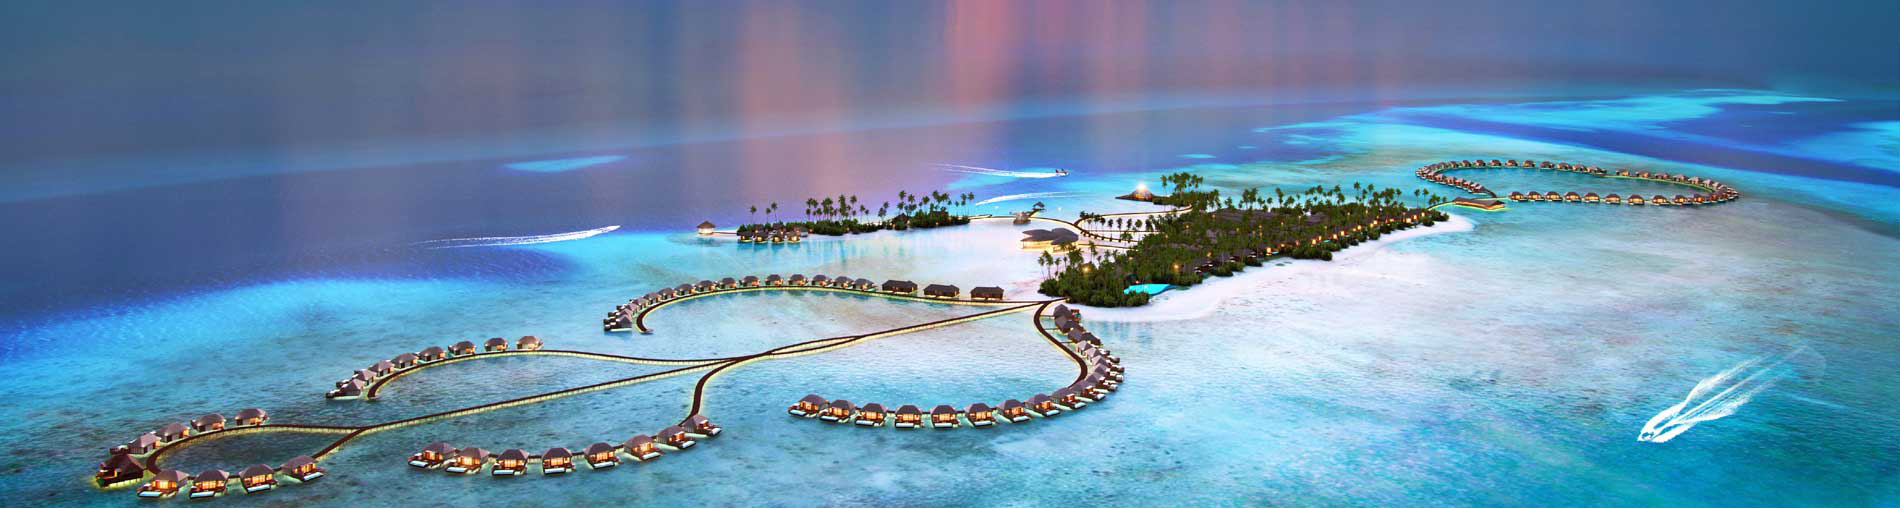 Maldives Holiday Tour Packages From India